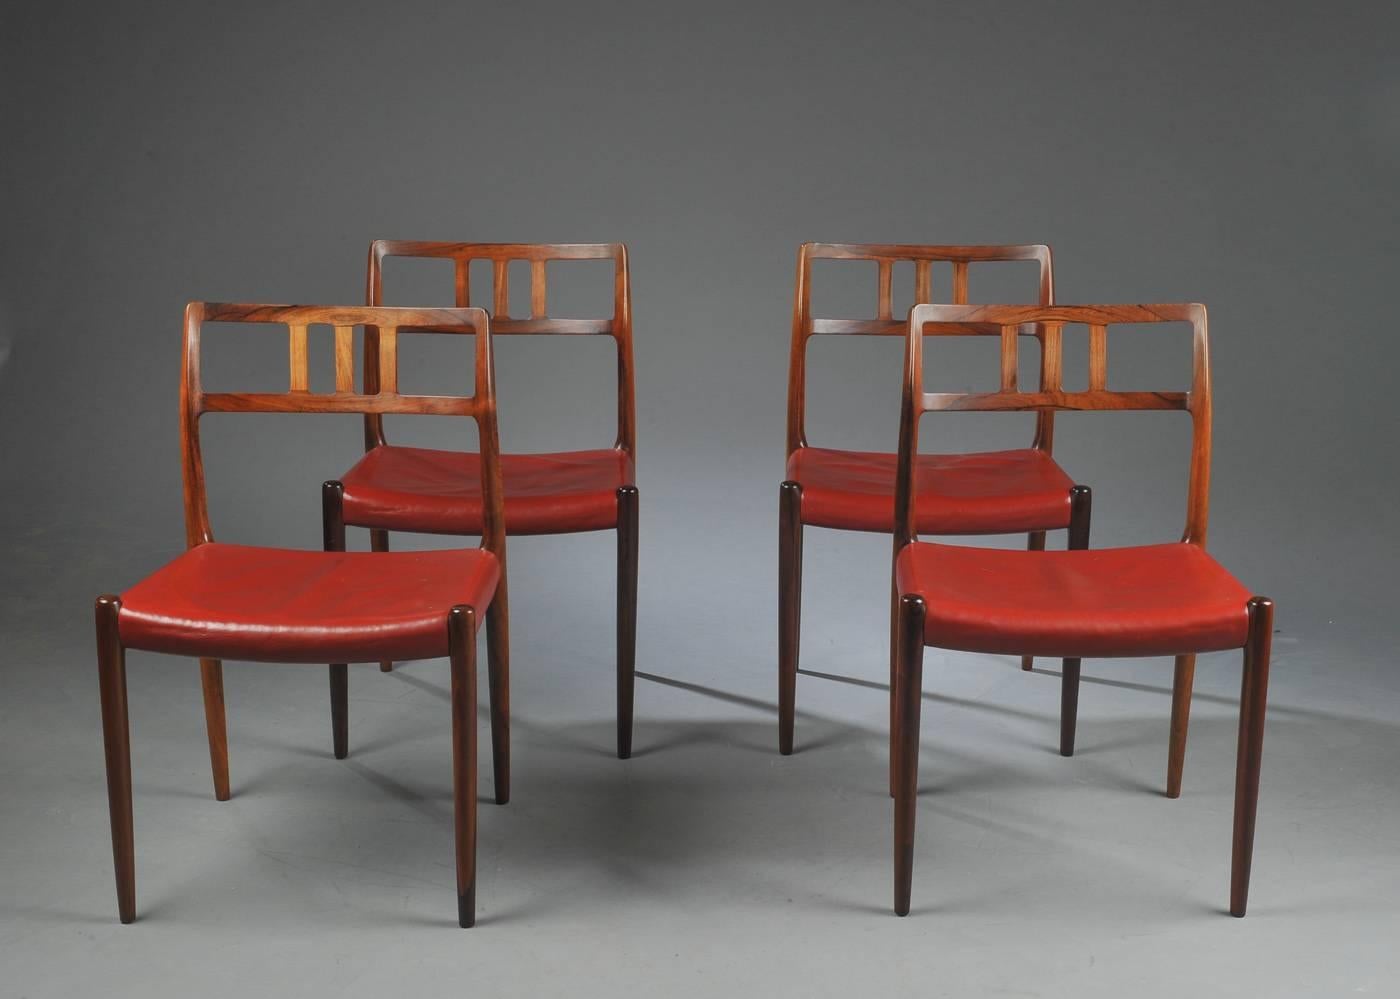 This set of four dining chairs was designed by Niels Otto Moller in 1966 and made by JL Moller before 1970. The chairs retain original red-brown leather seats in excellent condition. The rosewood frames are in excellent condition and display